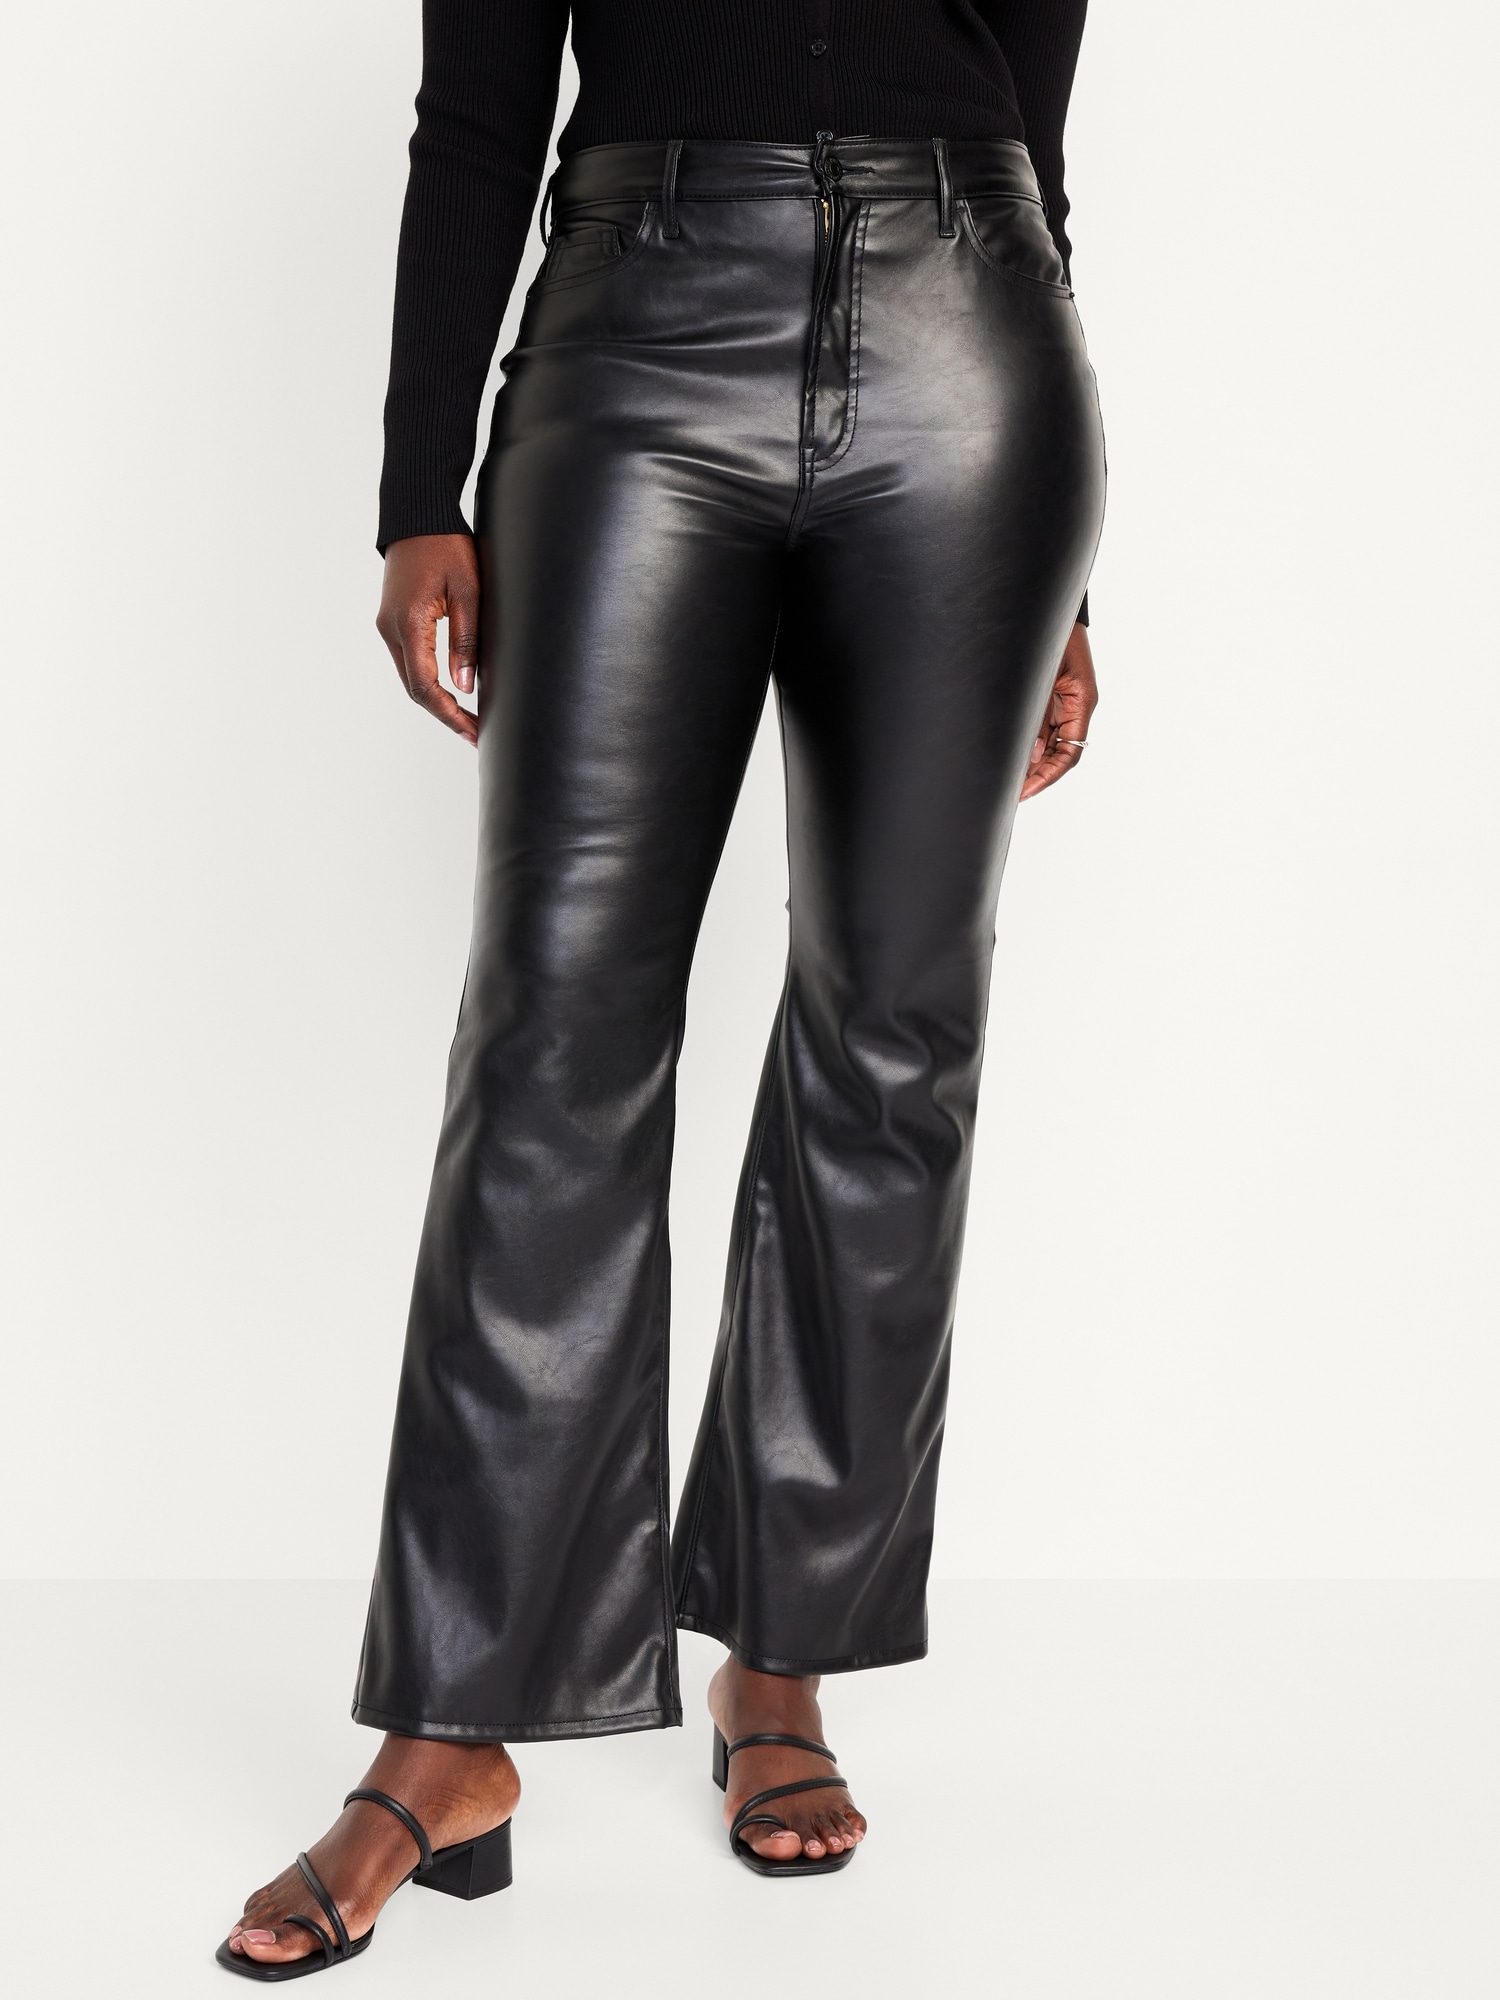 Leather flare pants 😍  Leather pants, Leather pants outfit, Flared pants  outfit